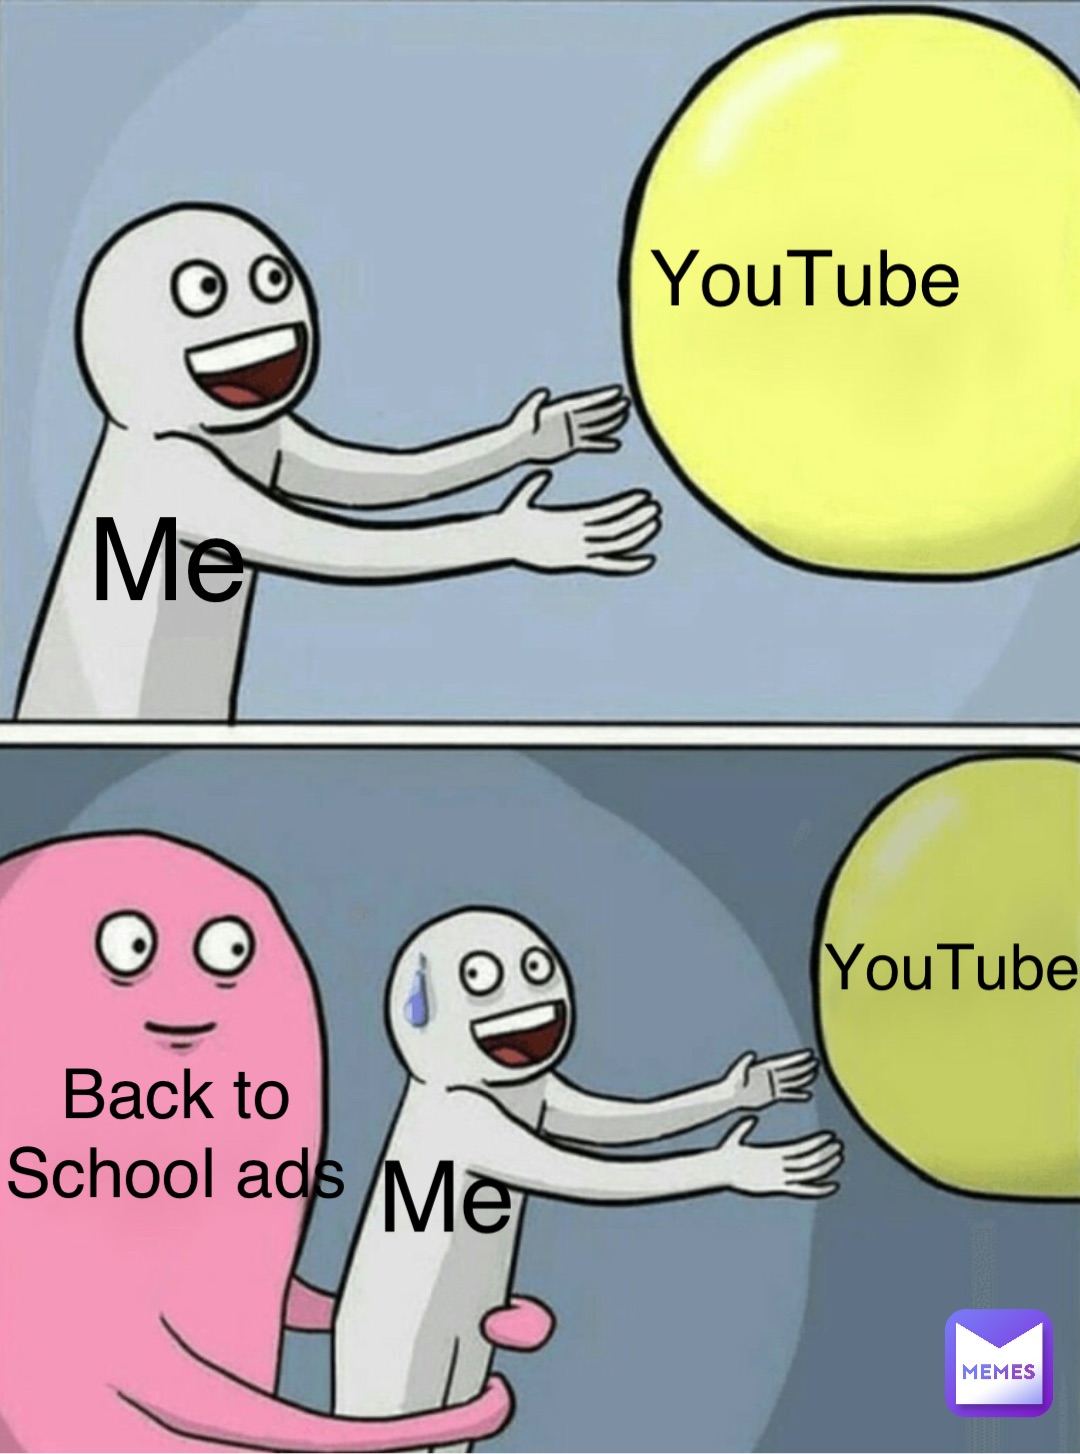 Me Me YouTube YouTube Back to
School ads